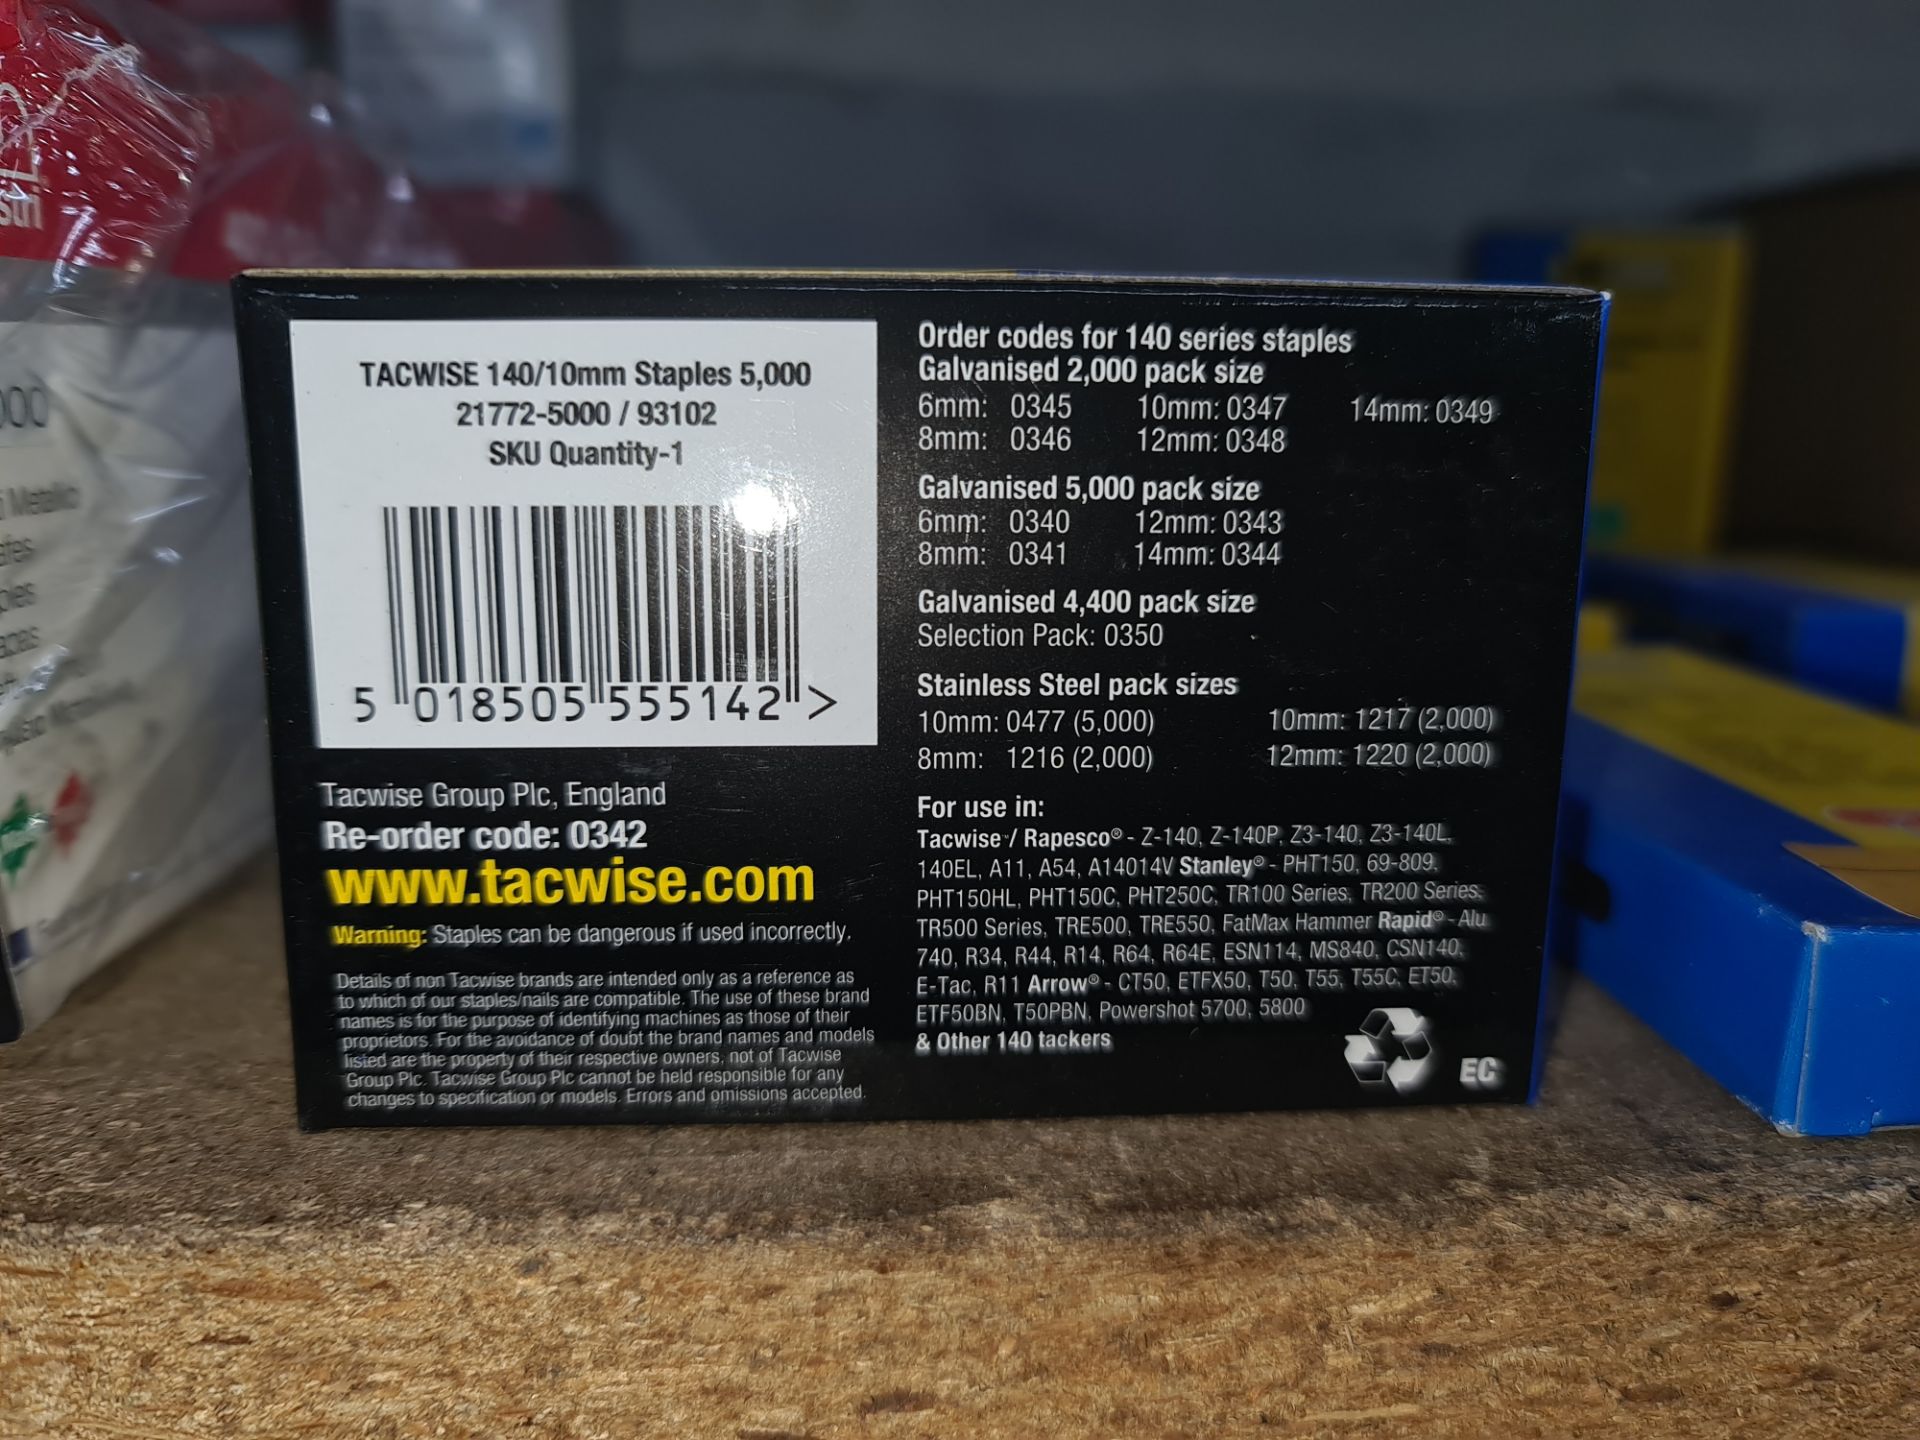 8 boxes of TACWISE 140/10mm 3/8"staples, each box containing 5,000 galvanised 140 series staples, - Image 3 of 3